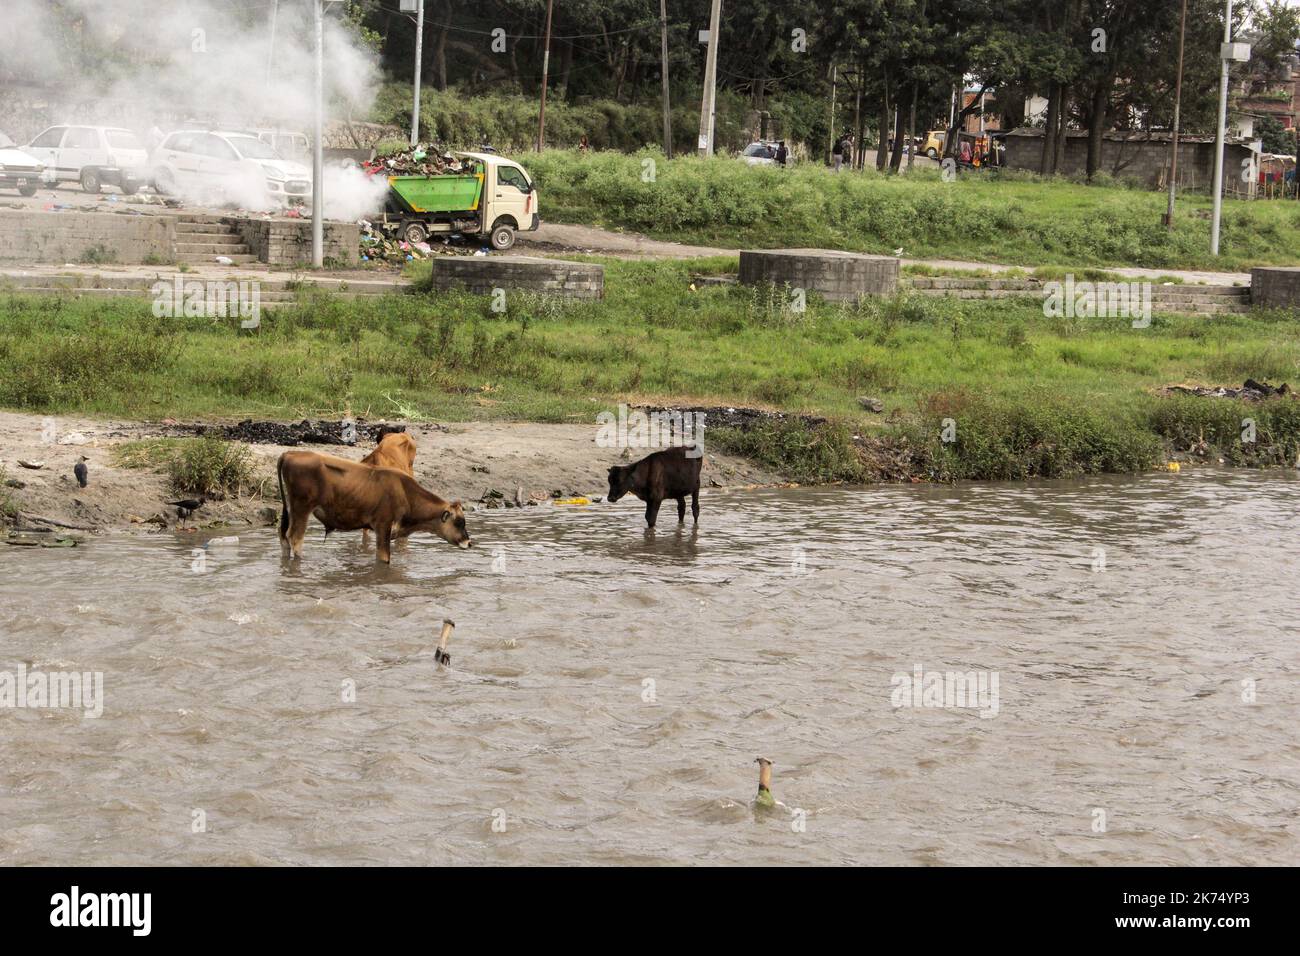 The opposite bank to that where the cremations are carried out. Oxen drink directly from the Bagmati River. Stock Photo